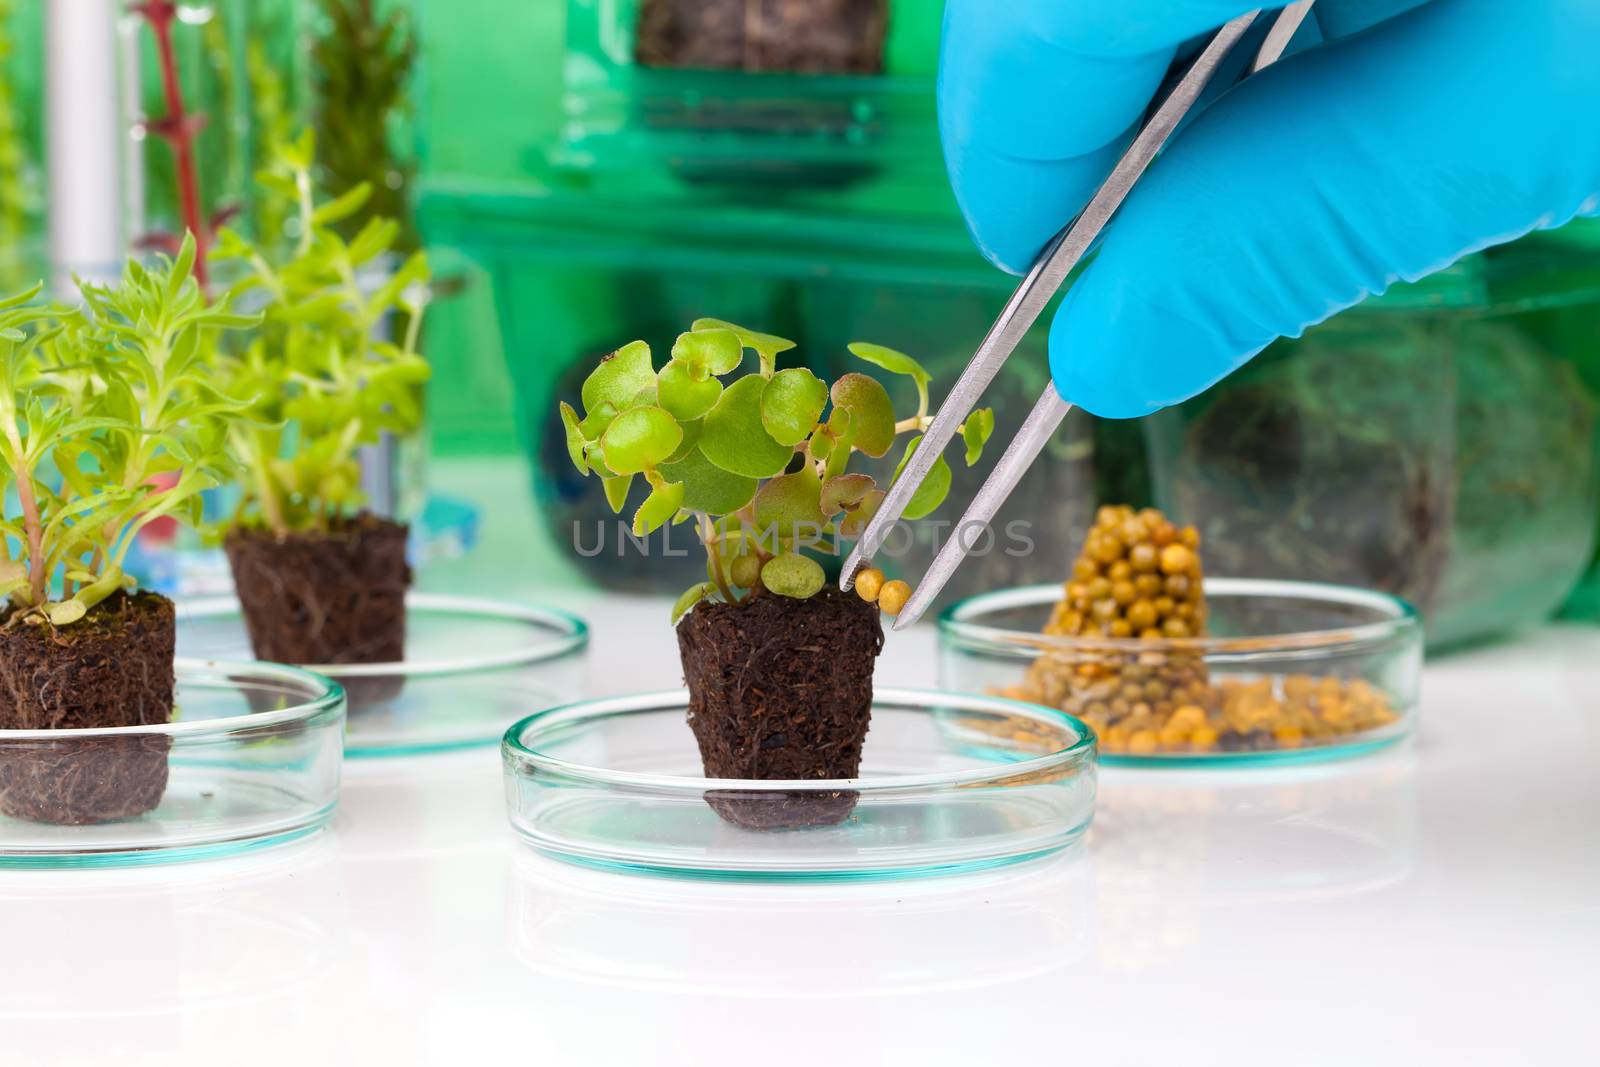 image showing a person's hands in blue rubber glove holding a small leafy plant with tweezers next tn the laboratory